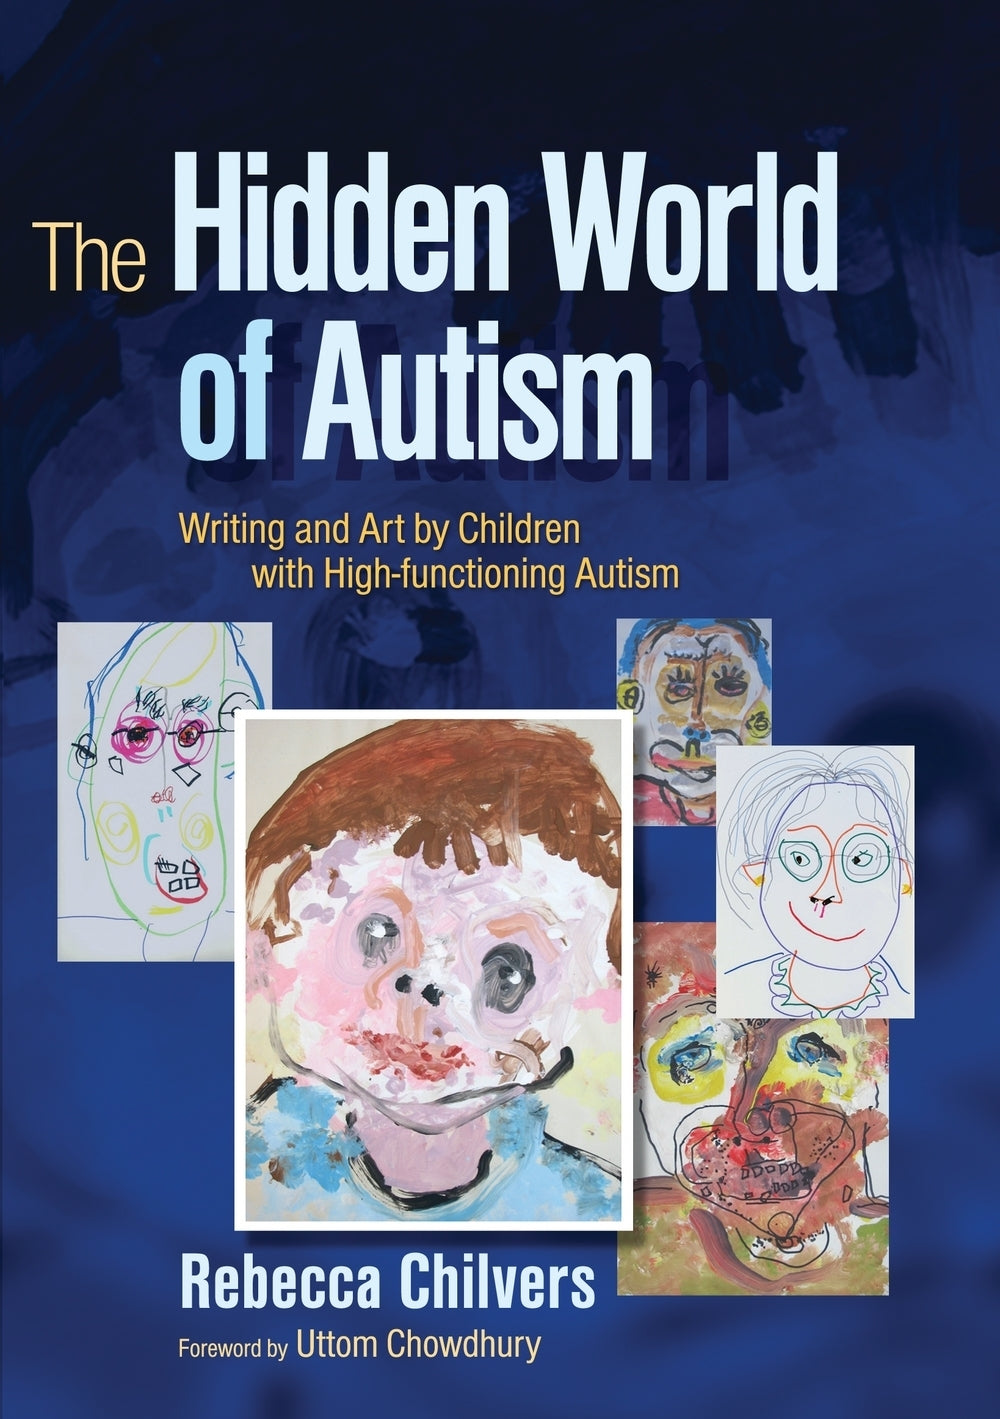 The Hidden World of Autism by Uttom Chowdhury, Rebecca Chilvers